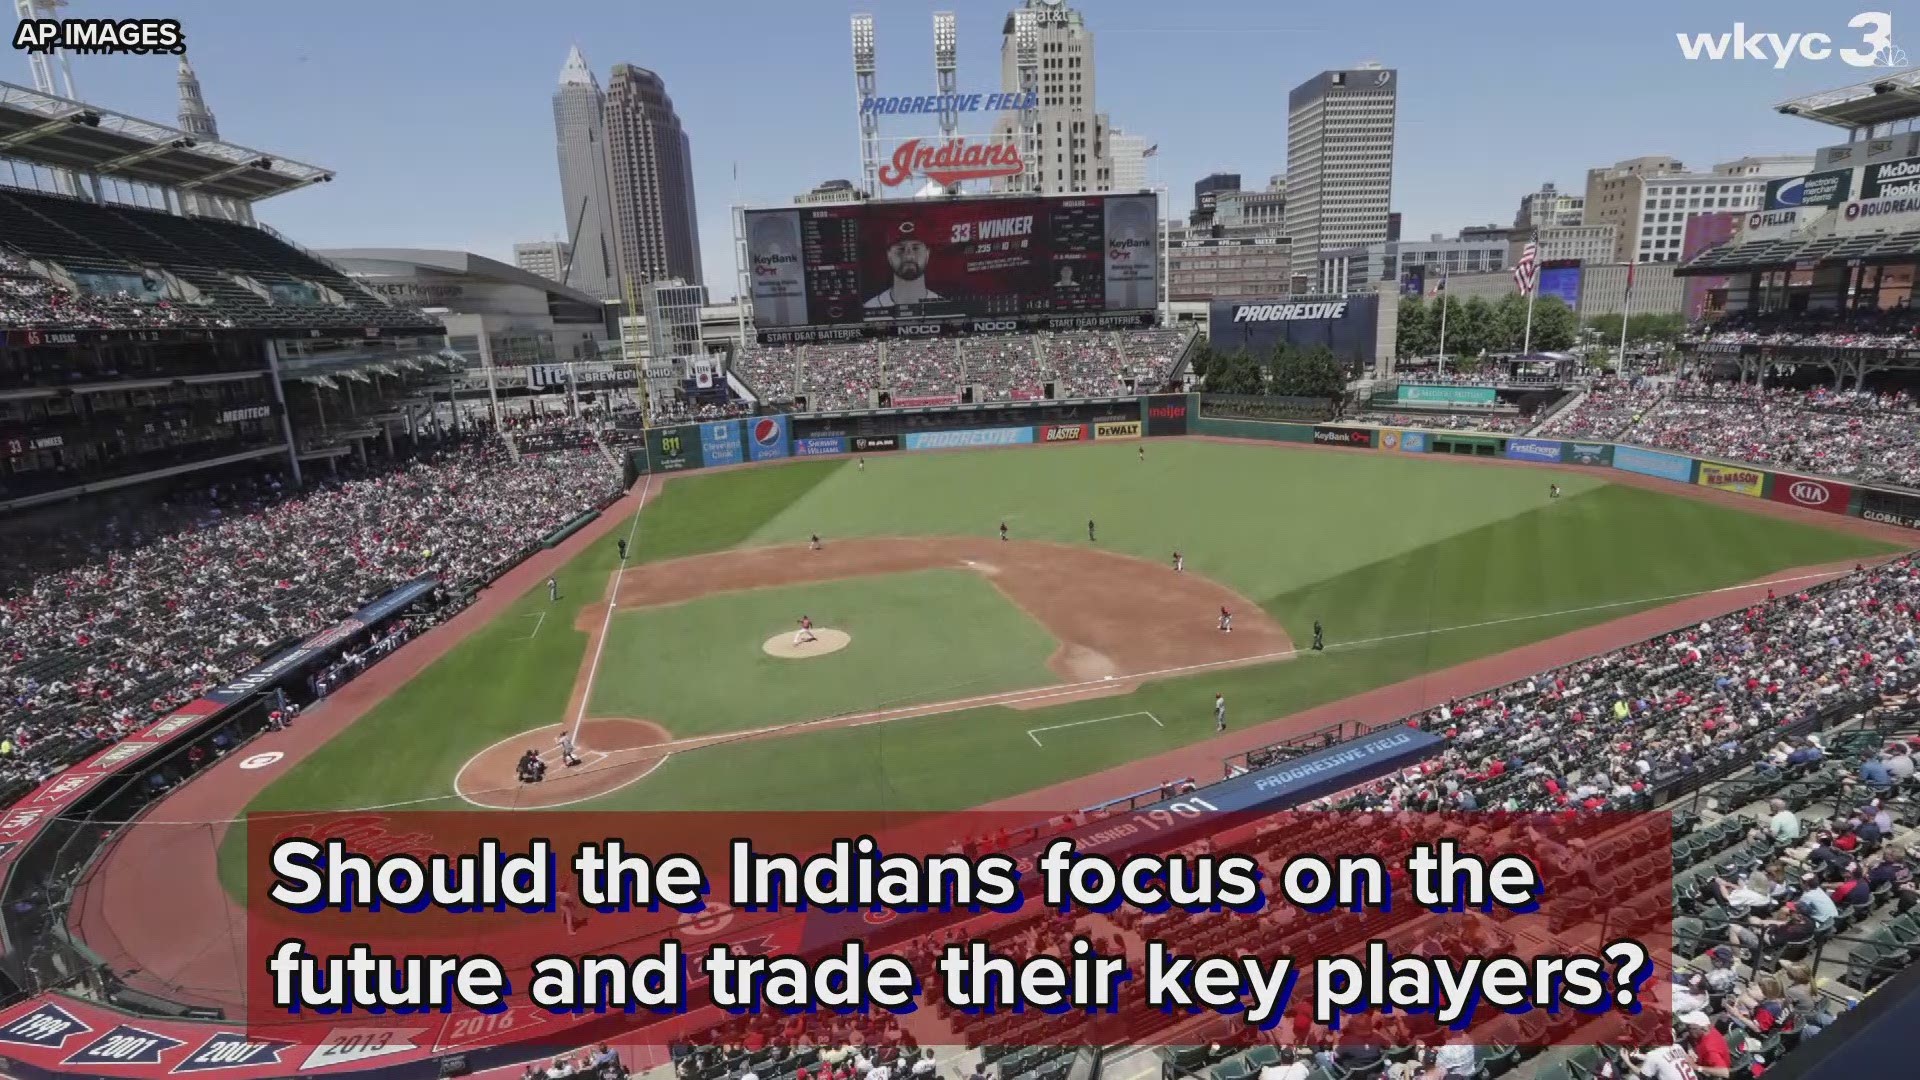 Should the Cleveland Indians turn their focus to the future and consider trading several key parts of the batting order, rotation and bullpen?